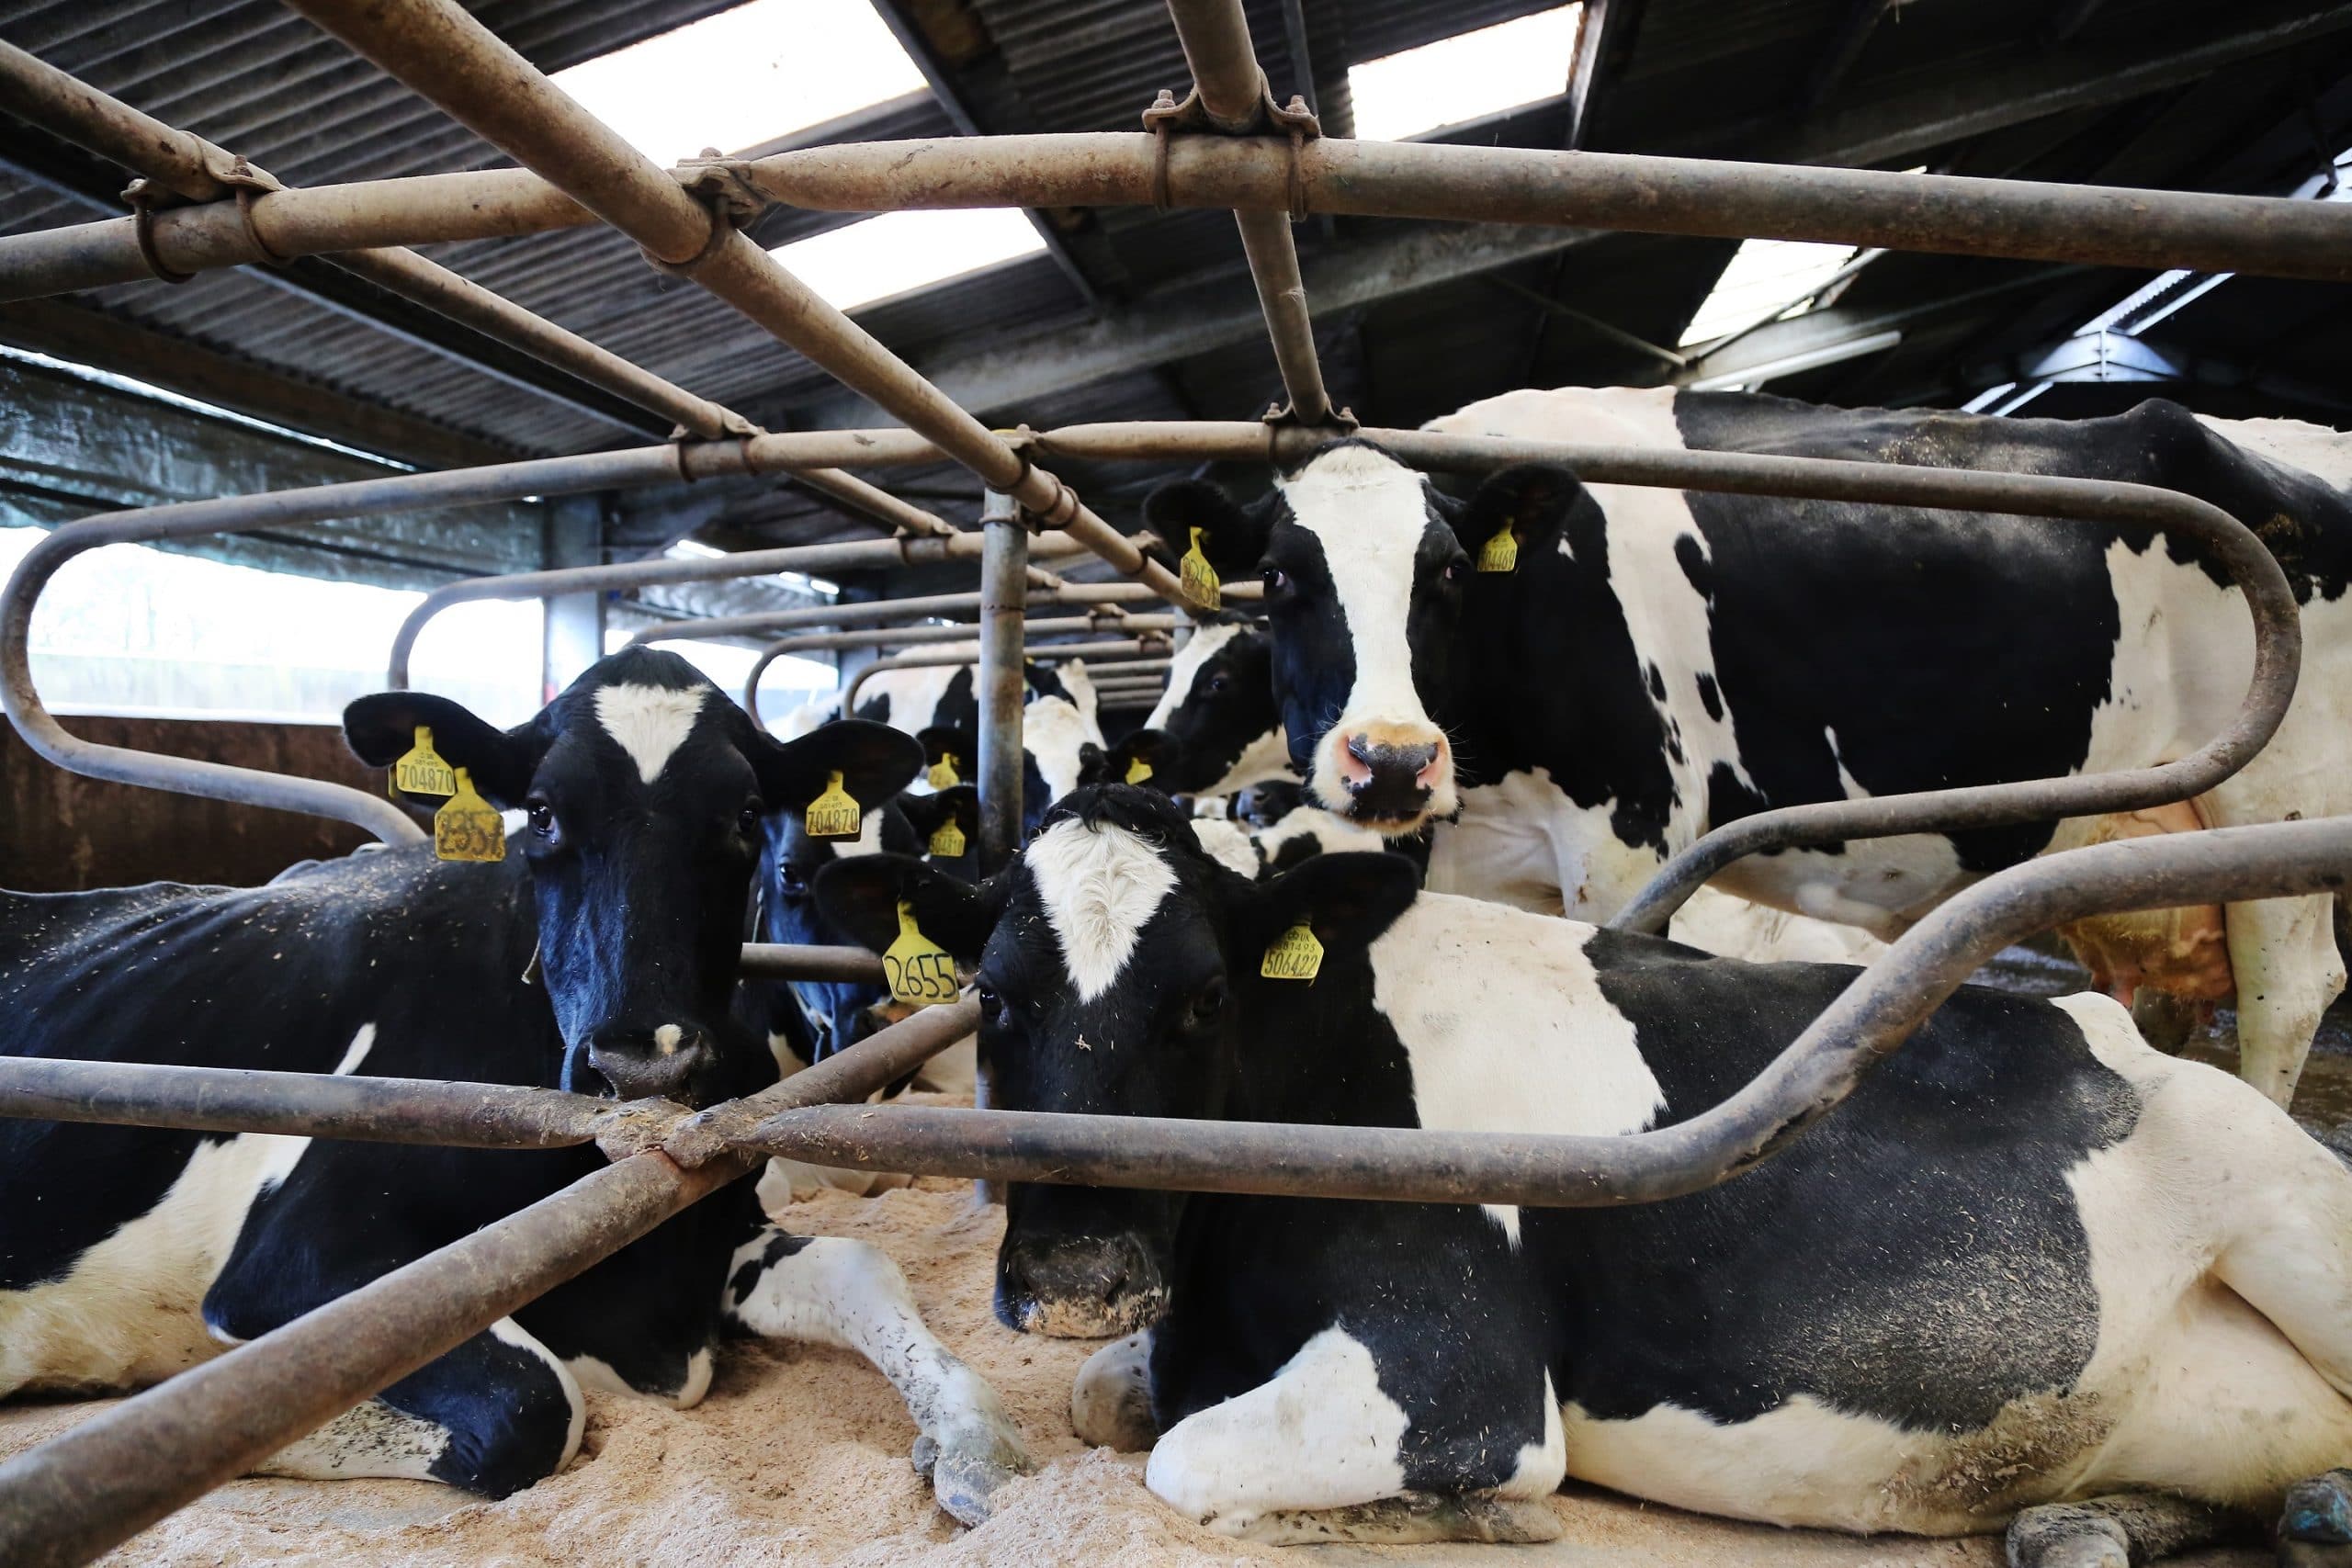 Digital dairy project wins funding